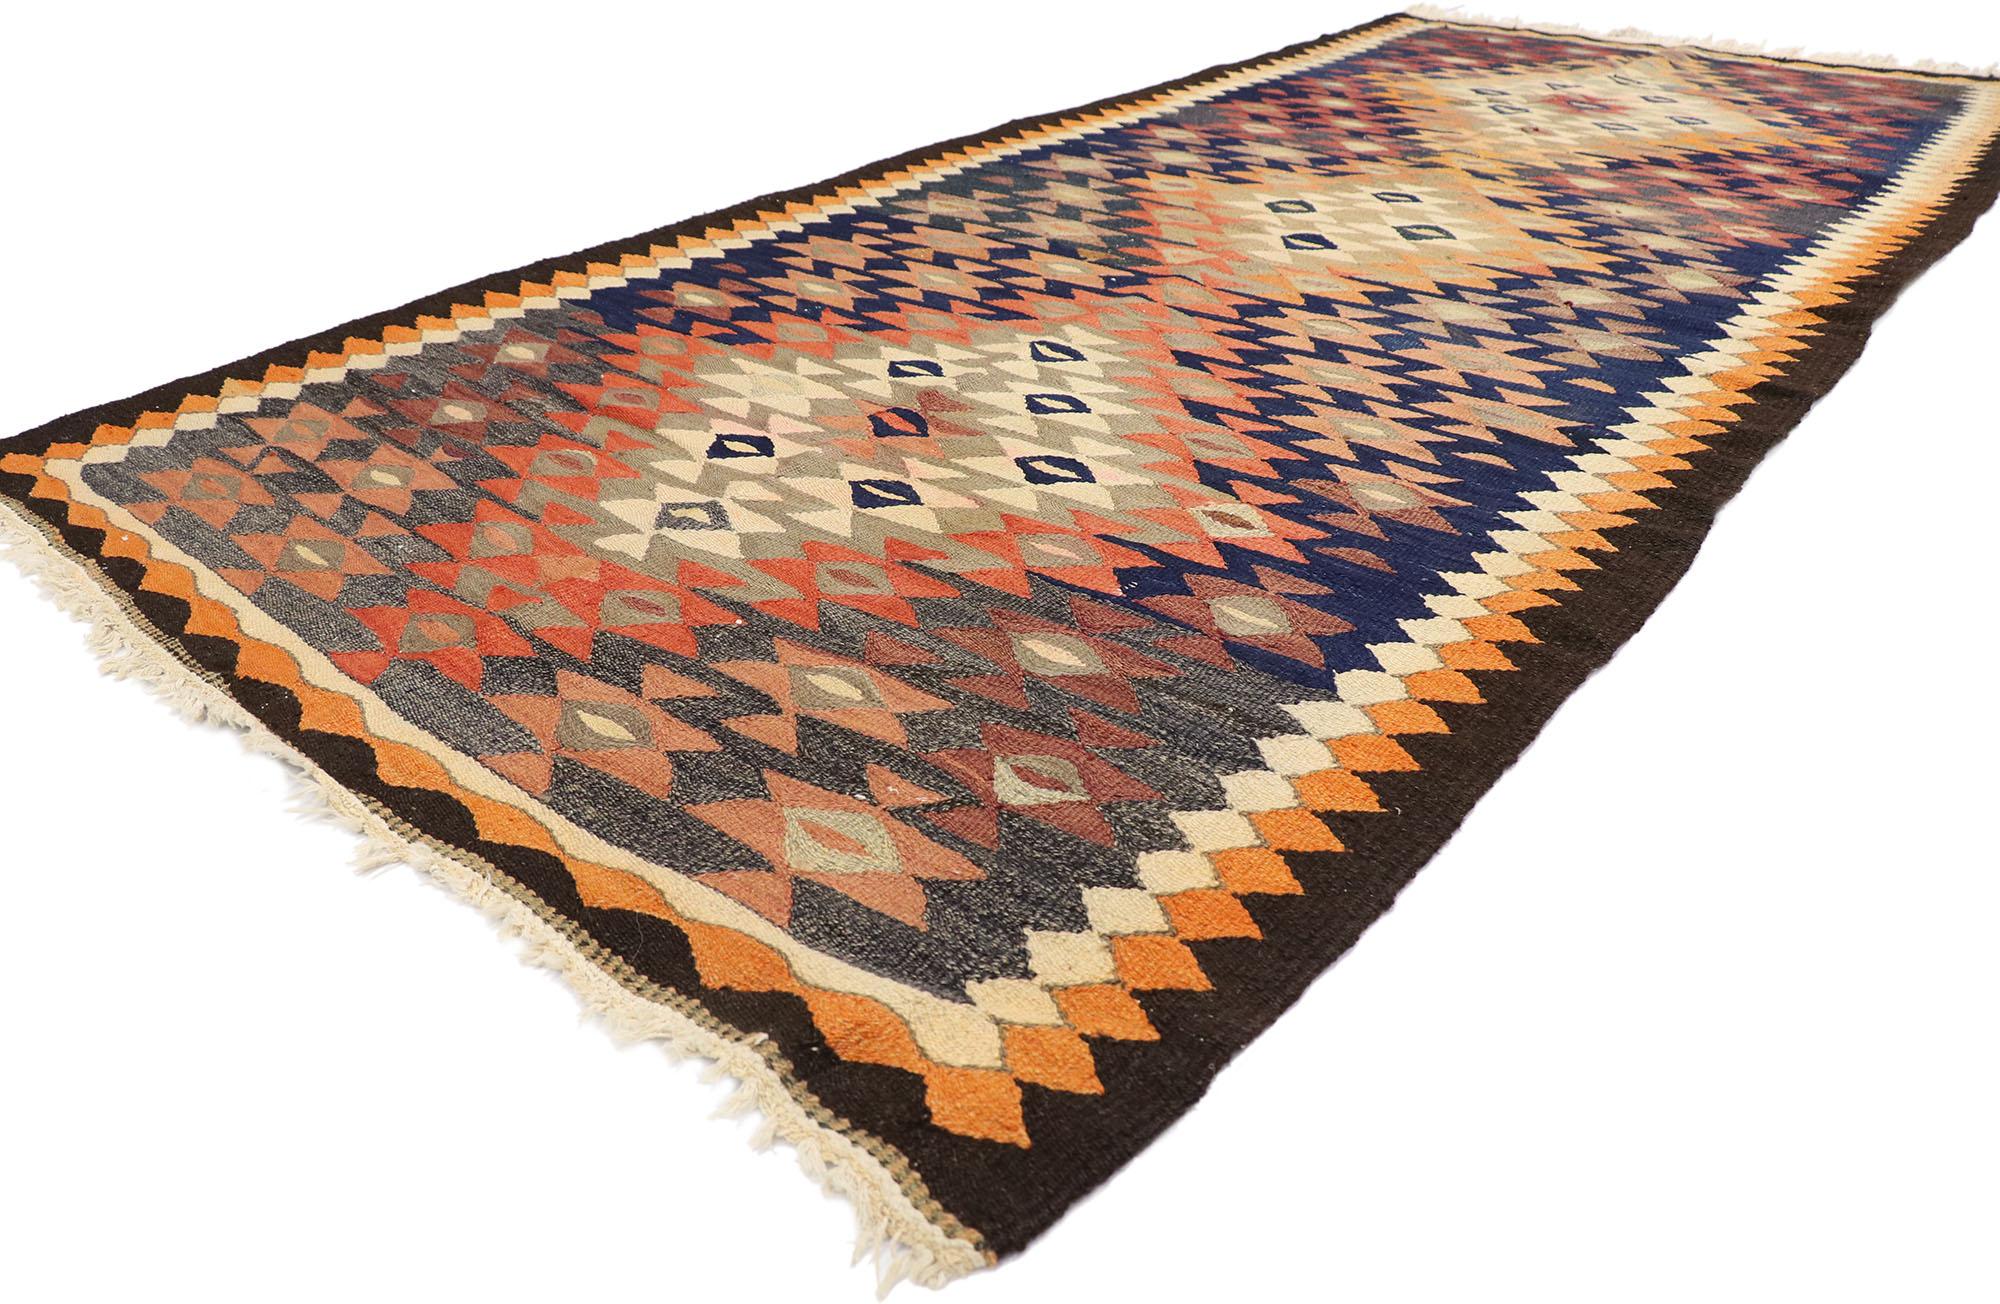 78015 Vintage Persian Bijar Kilim Rug, 04'04 x 09'07.
Embark on a captivating journey where tribal enchantment gracefully converges with modern desert chic in our handwoven wool vintage Persian Bijar kilim rug. Rooted in tradition, this flatweave